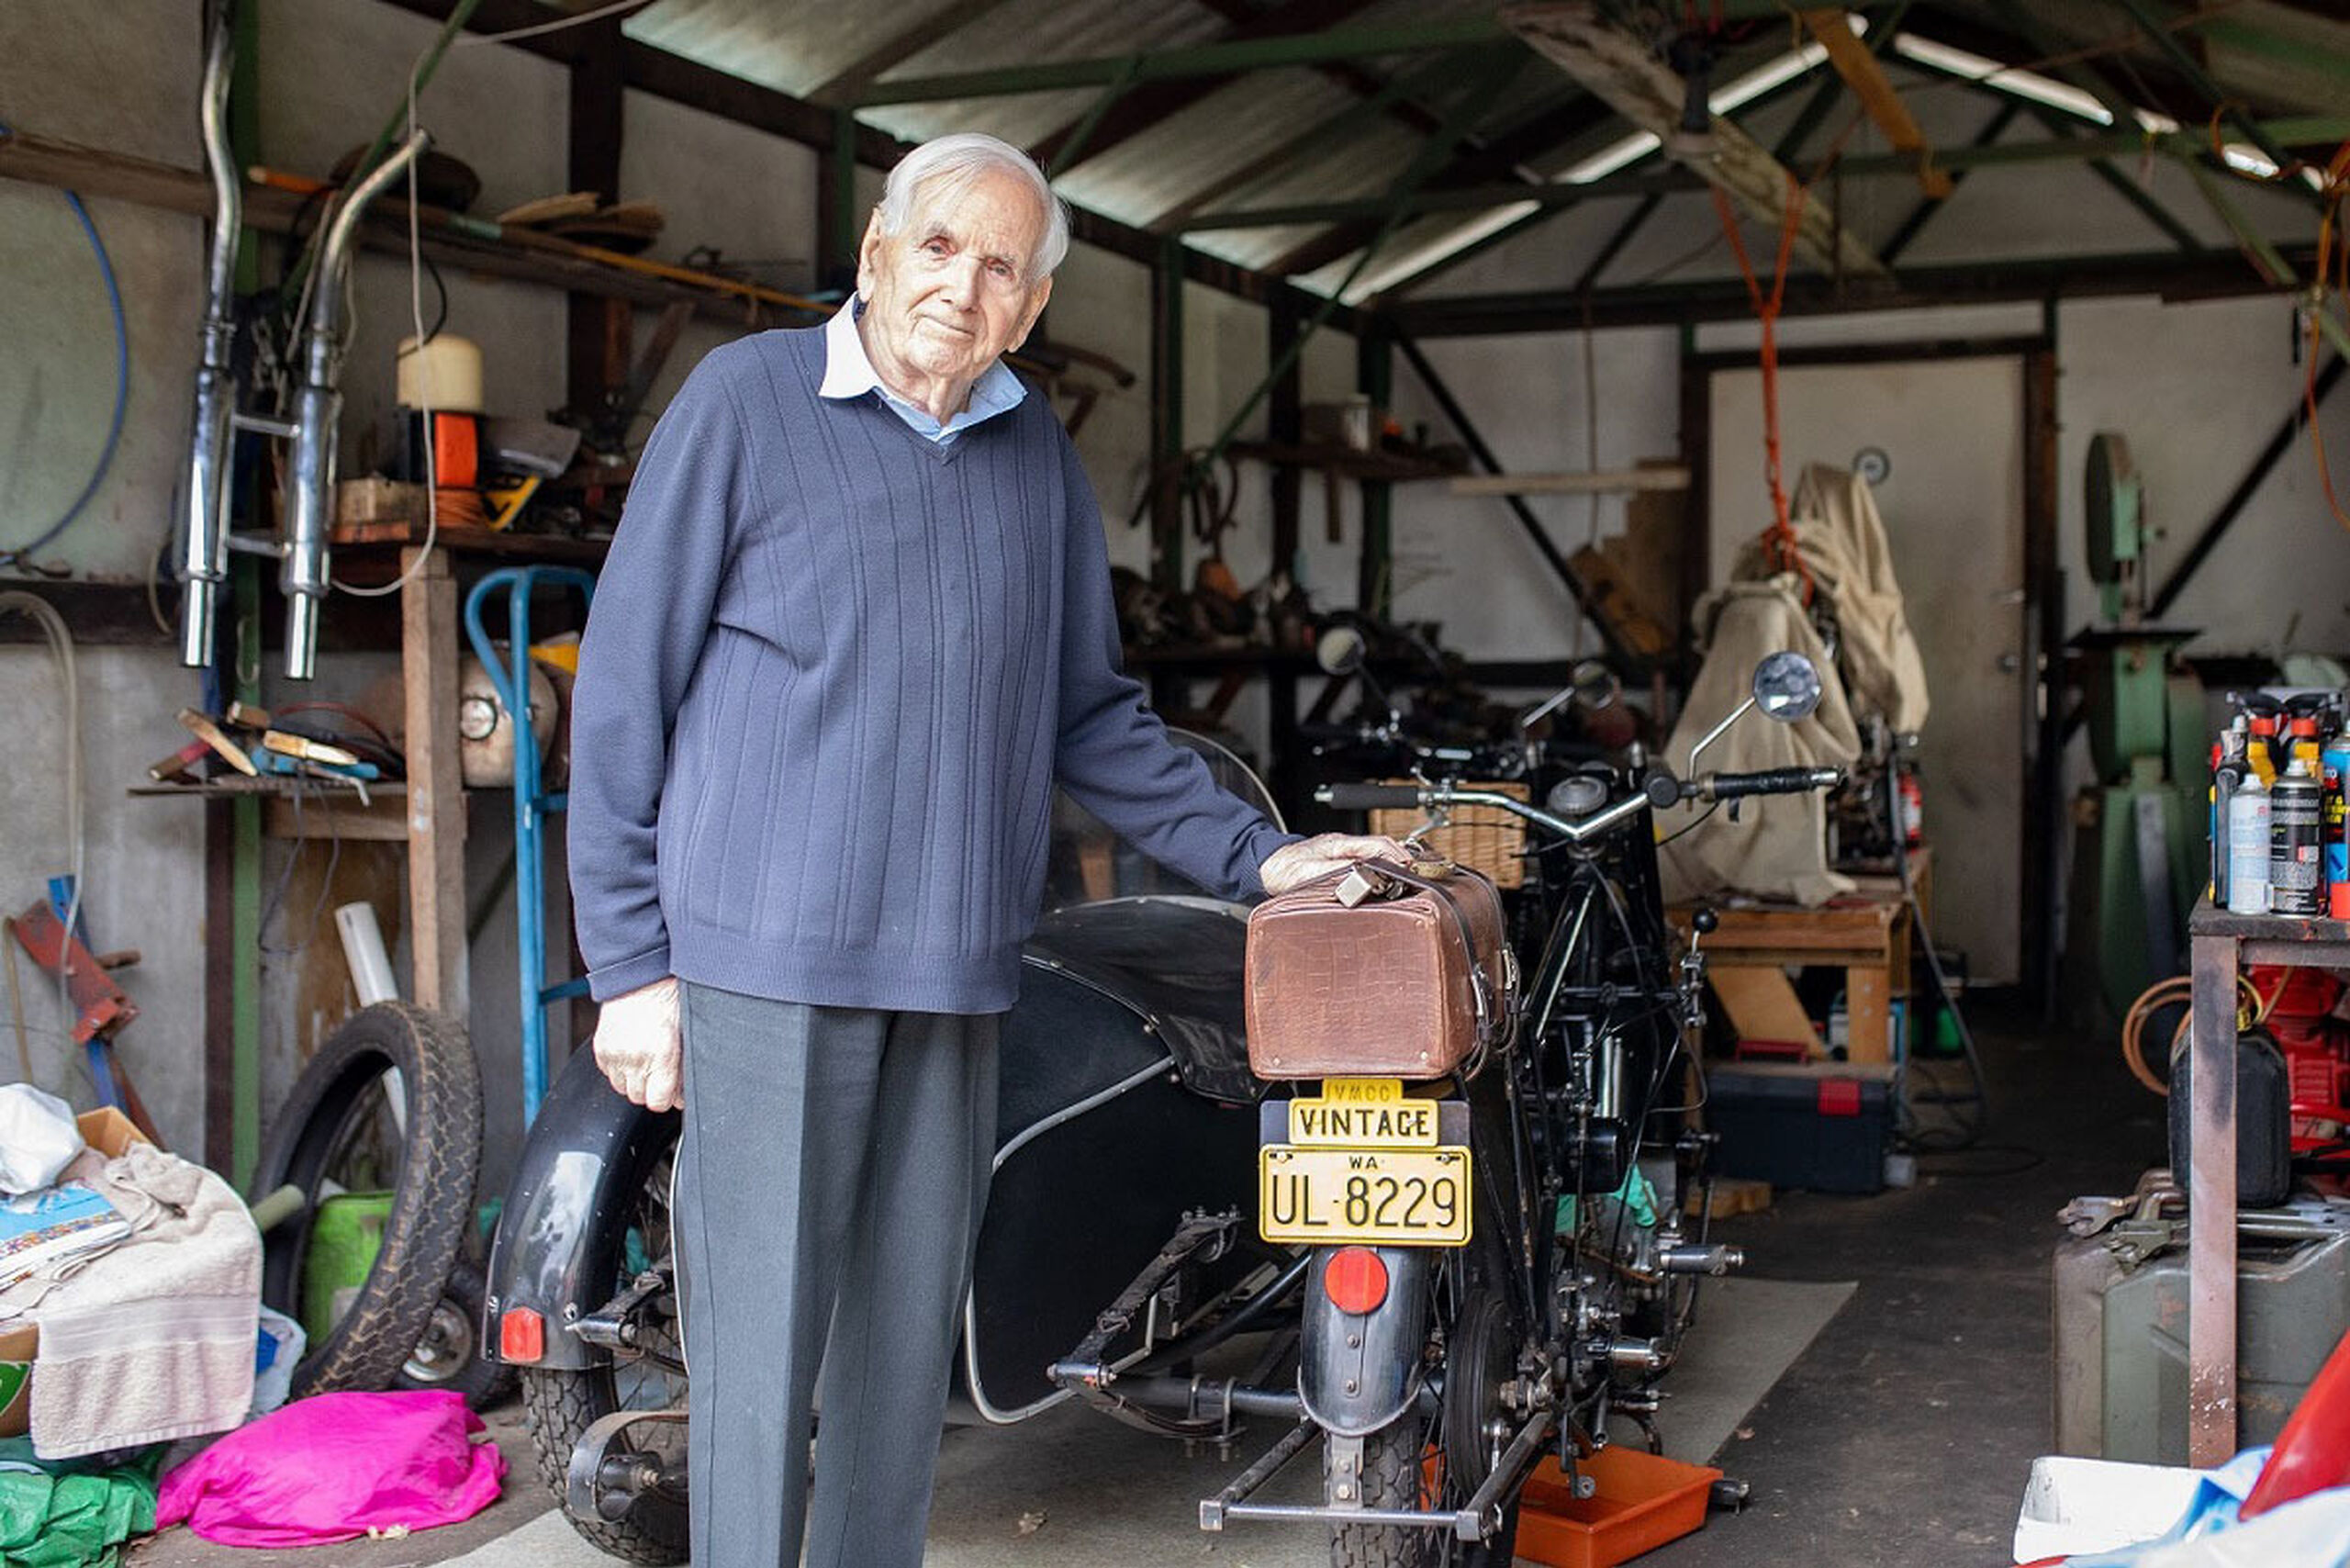 99 year old home care customer gives vintage motorcycles new life